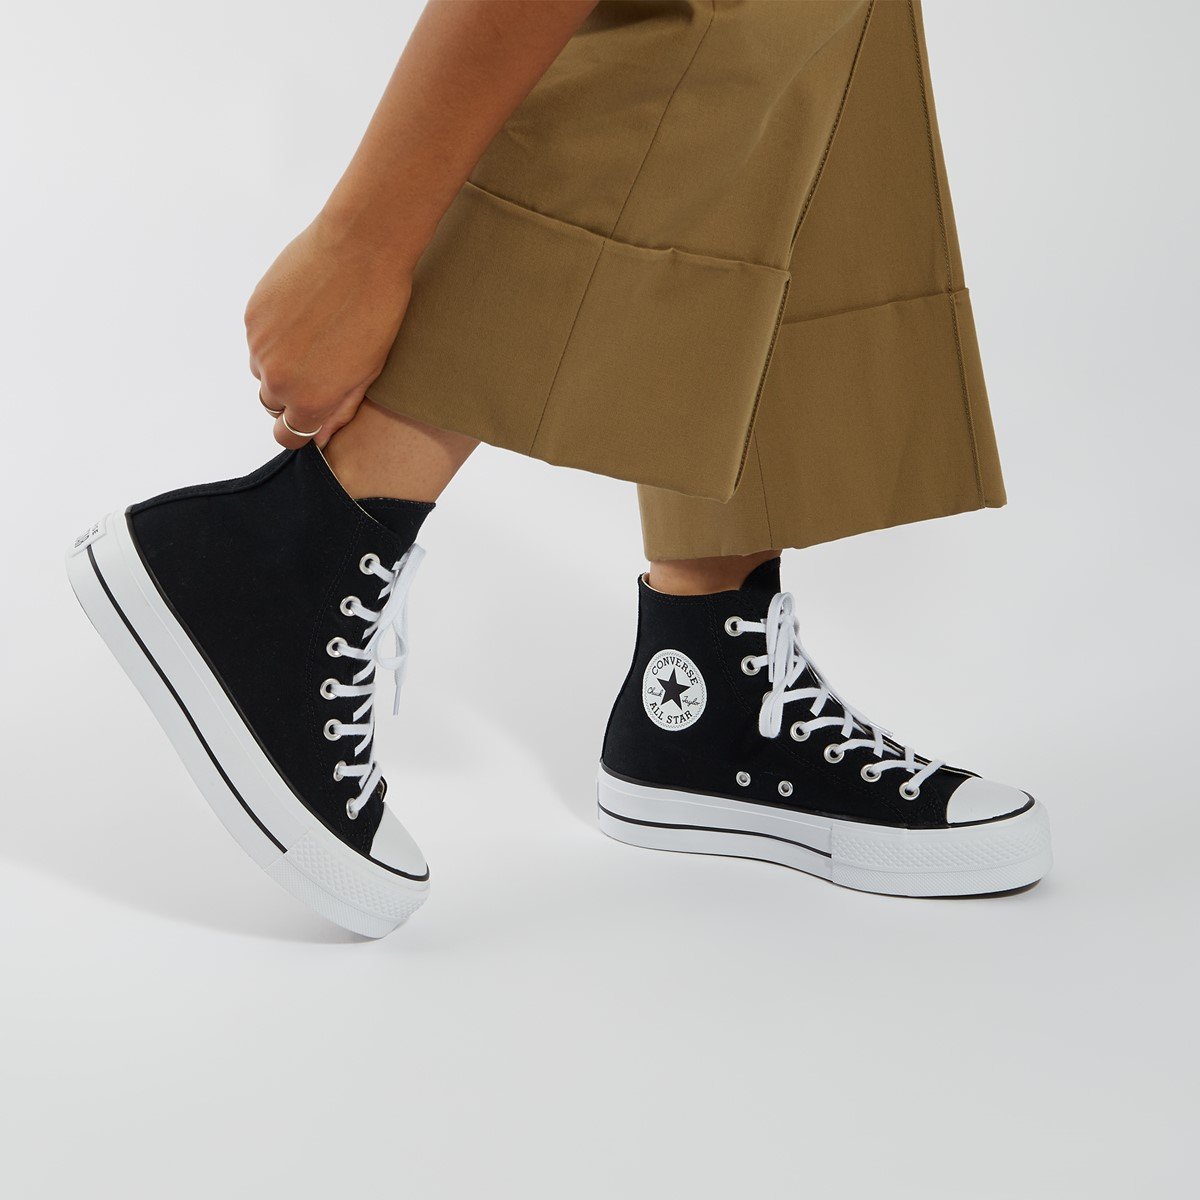 Women's Chuck Taylor All-Star Lift Sneakers in Black/White دلات قهوة